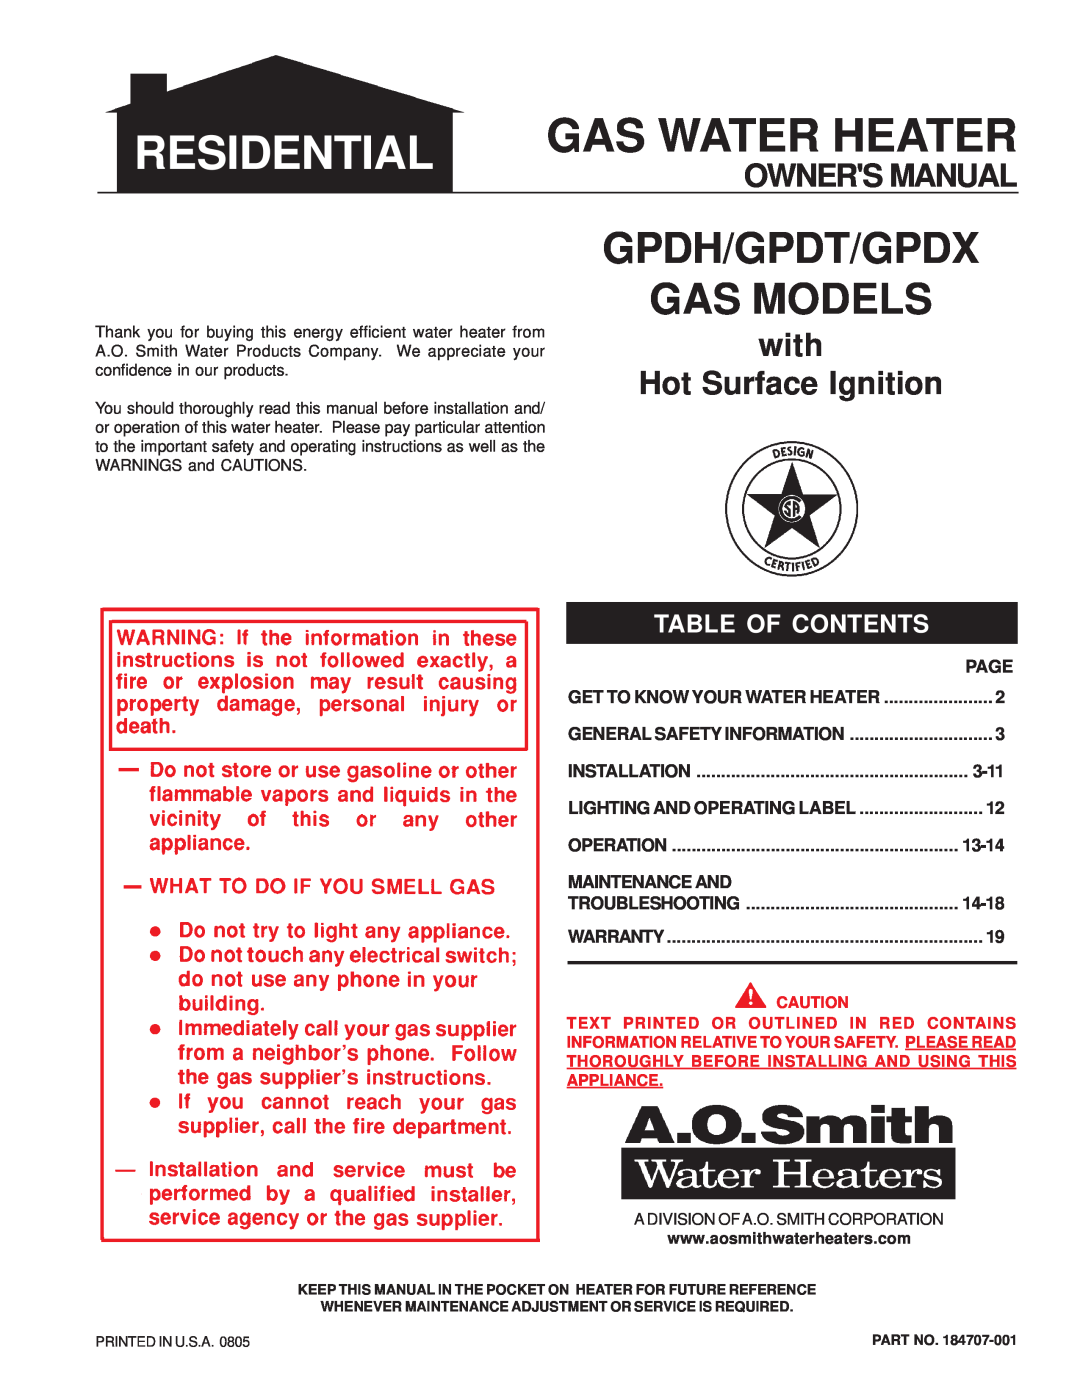 A.O. Smith GPDH, GPDX owner manual Page, 3-11, 13-14, Maintenance And, 14-18, Residential, Gas Water Heater, Owners Manual 